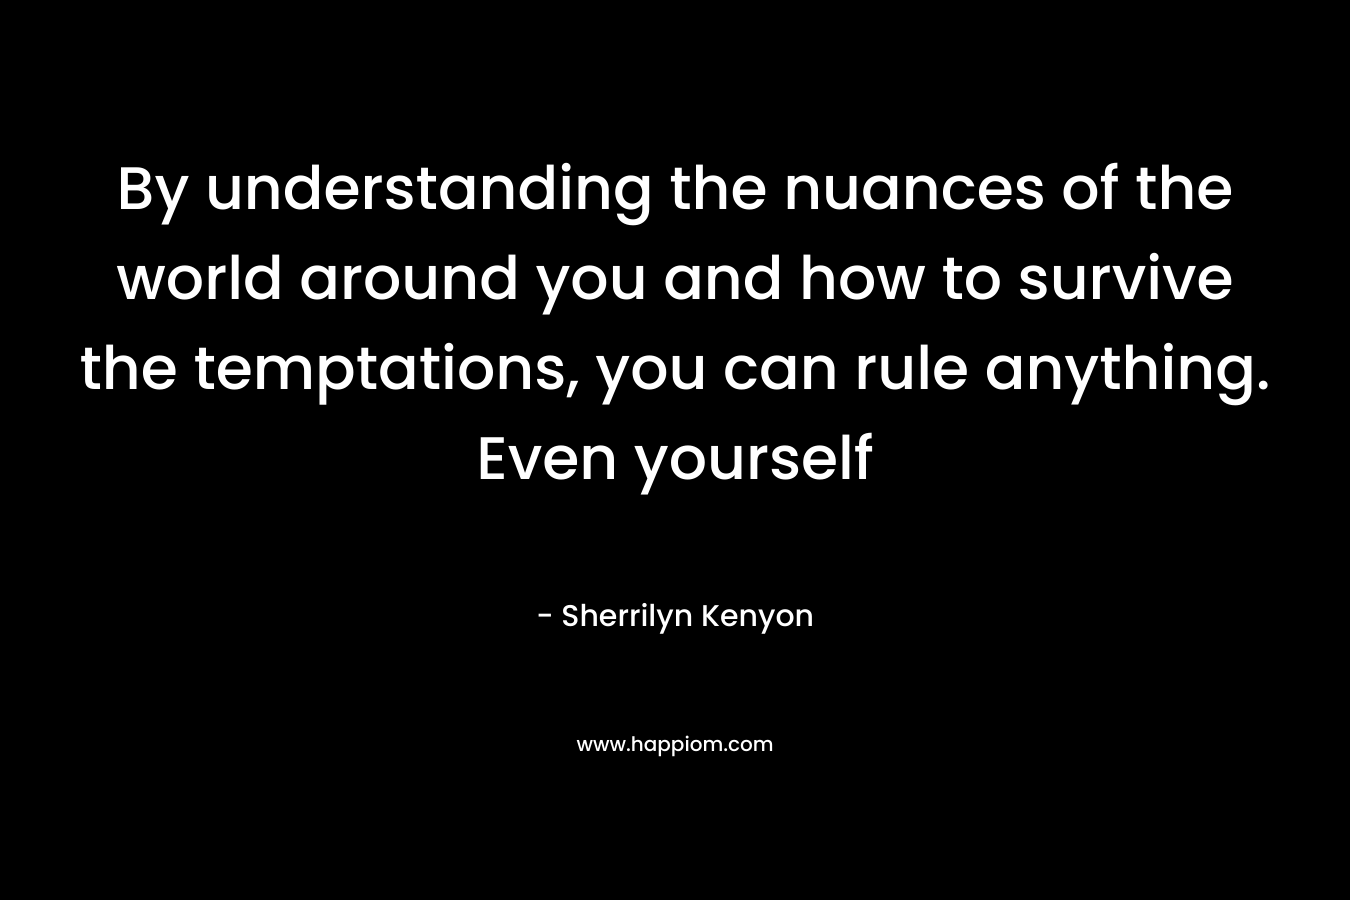 By understanding the nuances of the world around you and how to survive the temptations, you can rule anything. Even yourself – Sherrilyn Kenyon